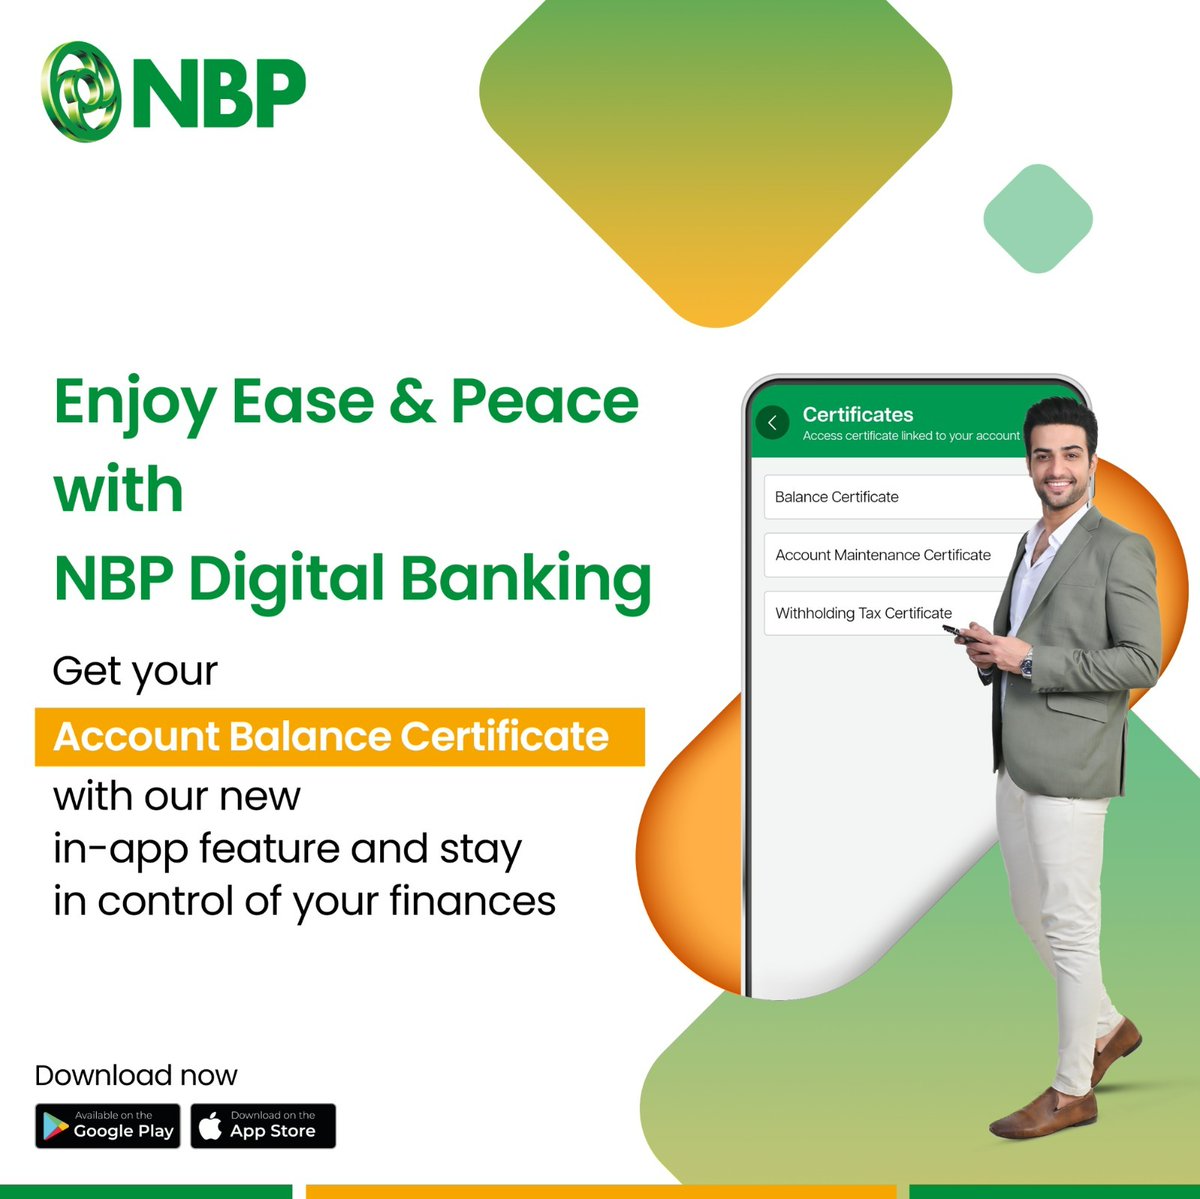 Enjoy Ease & Peace with NBP Digital Banking Get your Account Balance Certificate with our new in-app feature and stay in control of your finances. Download Now! #NationalBankofPakistan #NBP #NationsBank #NBPDigital #App